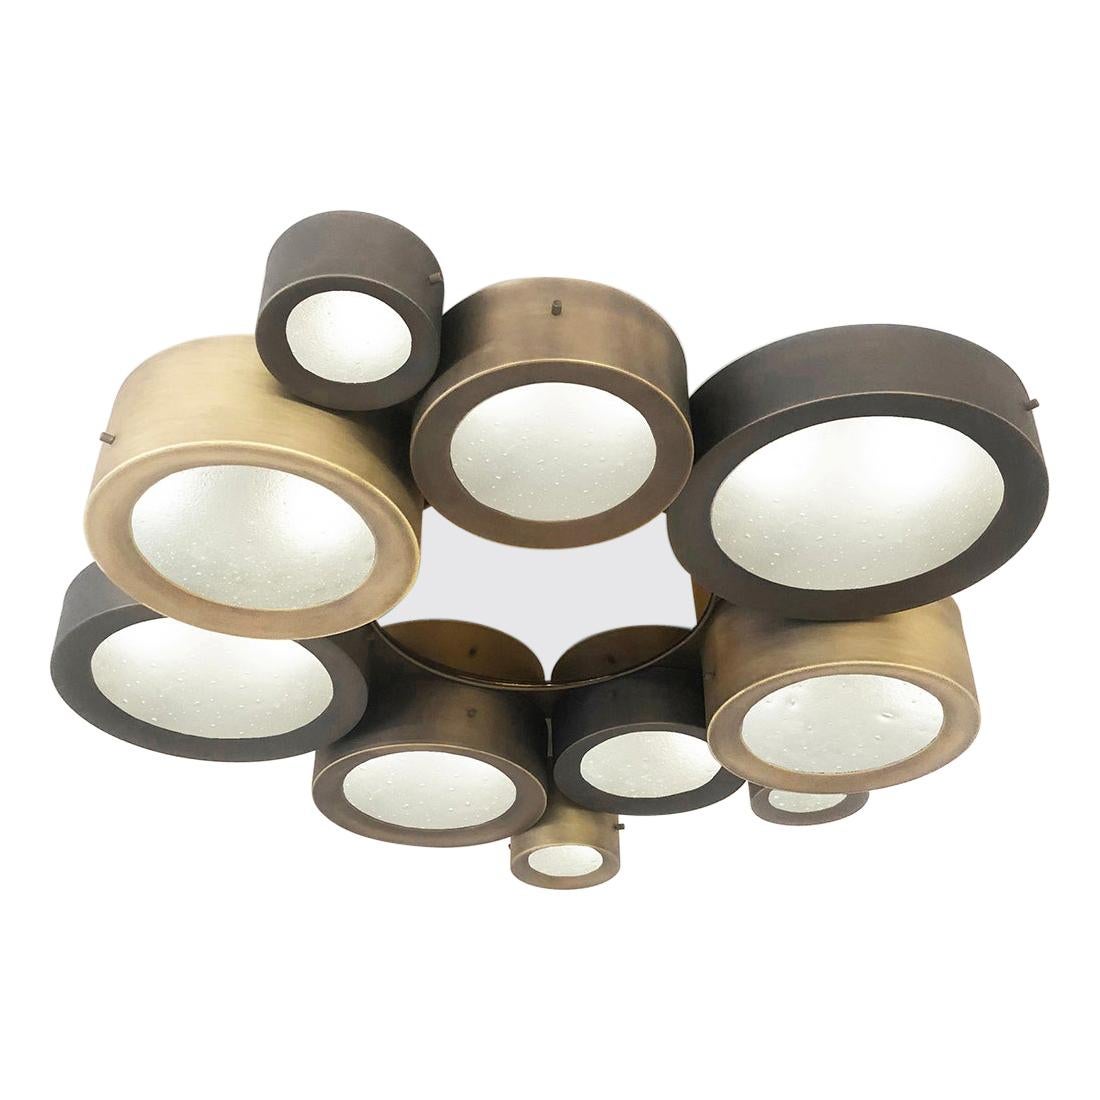 Italian Helios 44 Ceiling Light by Gaspare Asaro-Satin Brass and Satin Nickel For Sale